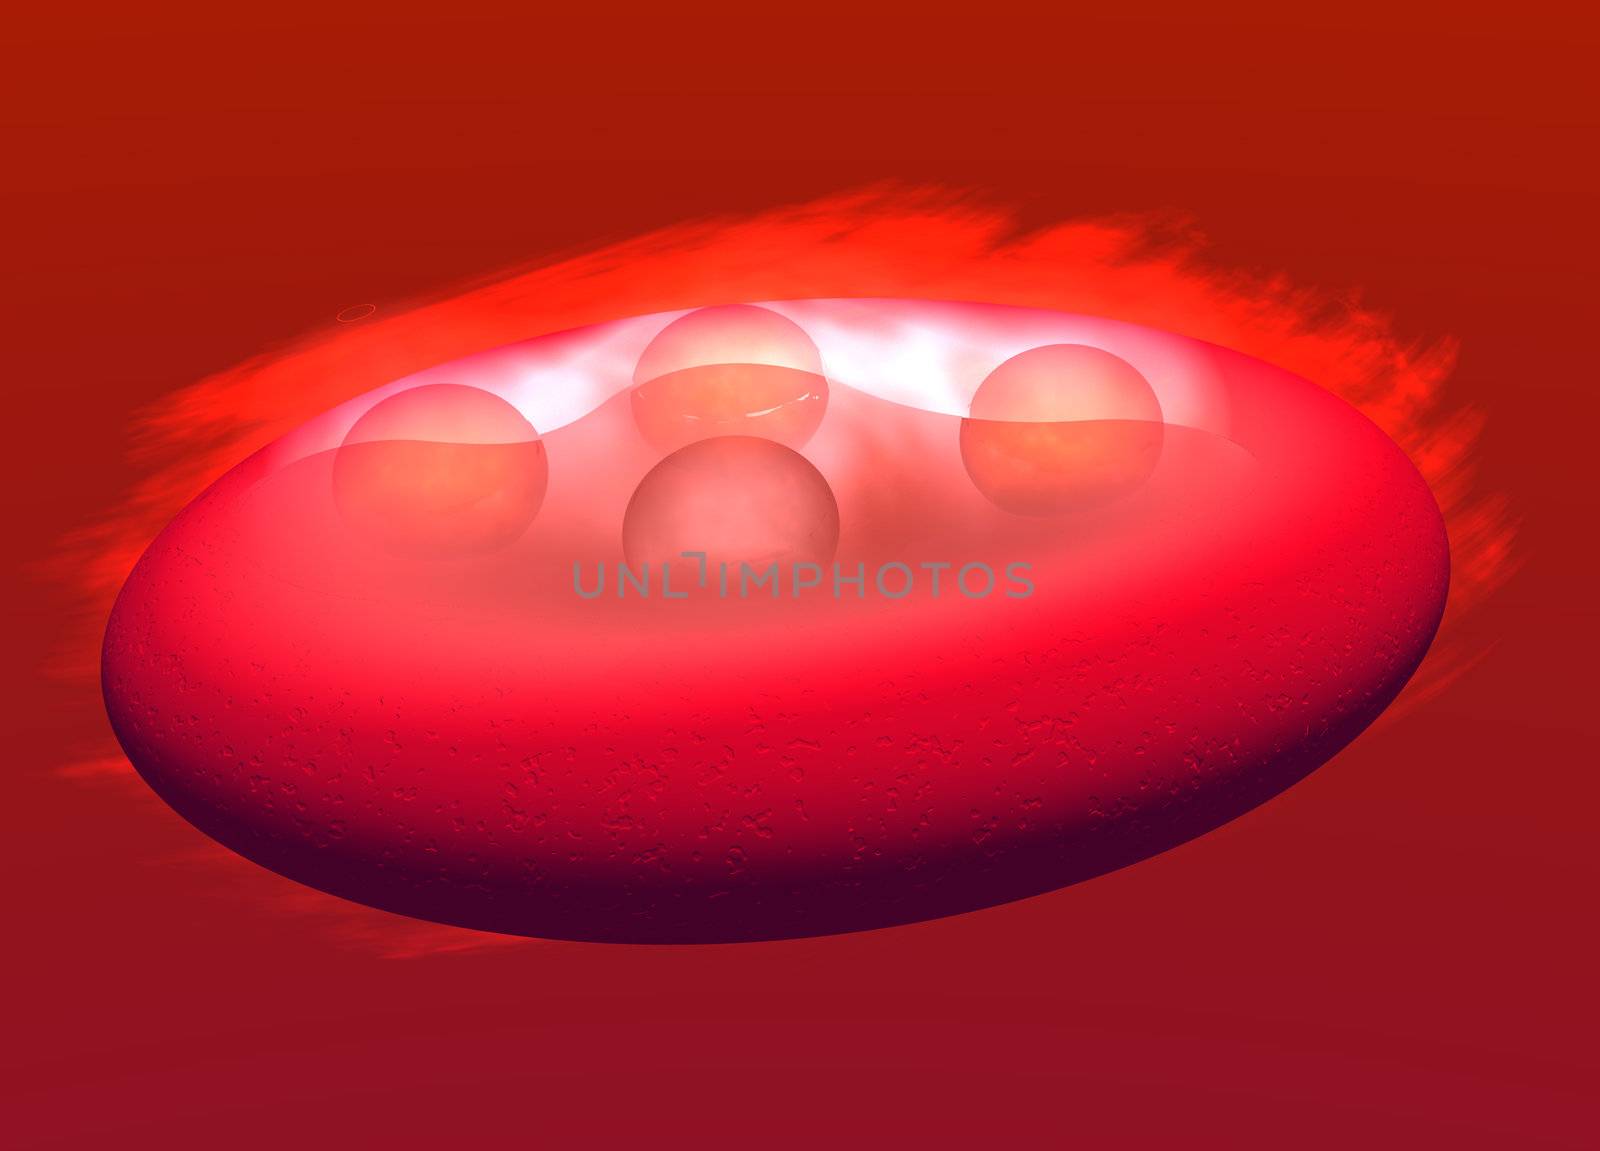 3d Red Blood Cell Carrying Oxygen particles Through the Bloodstream with Cloud around it